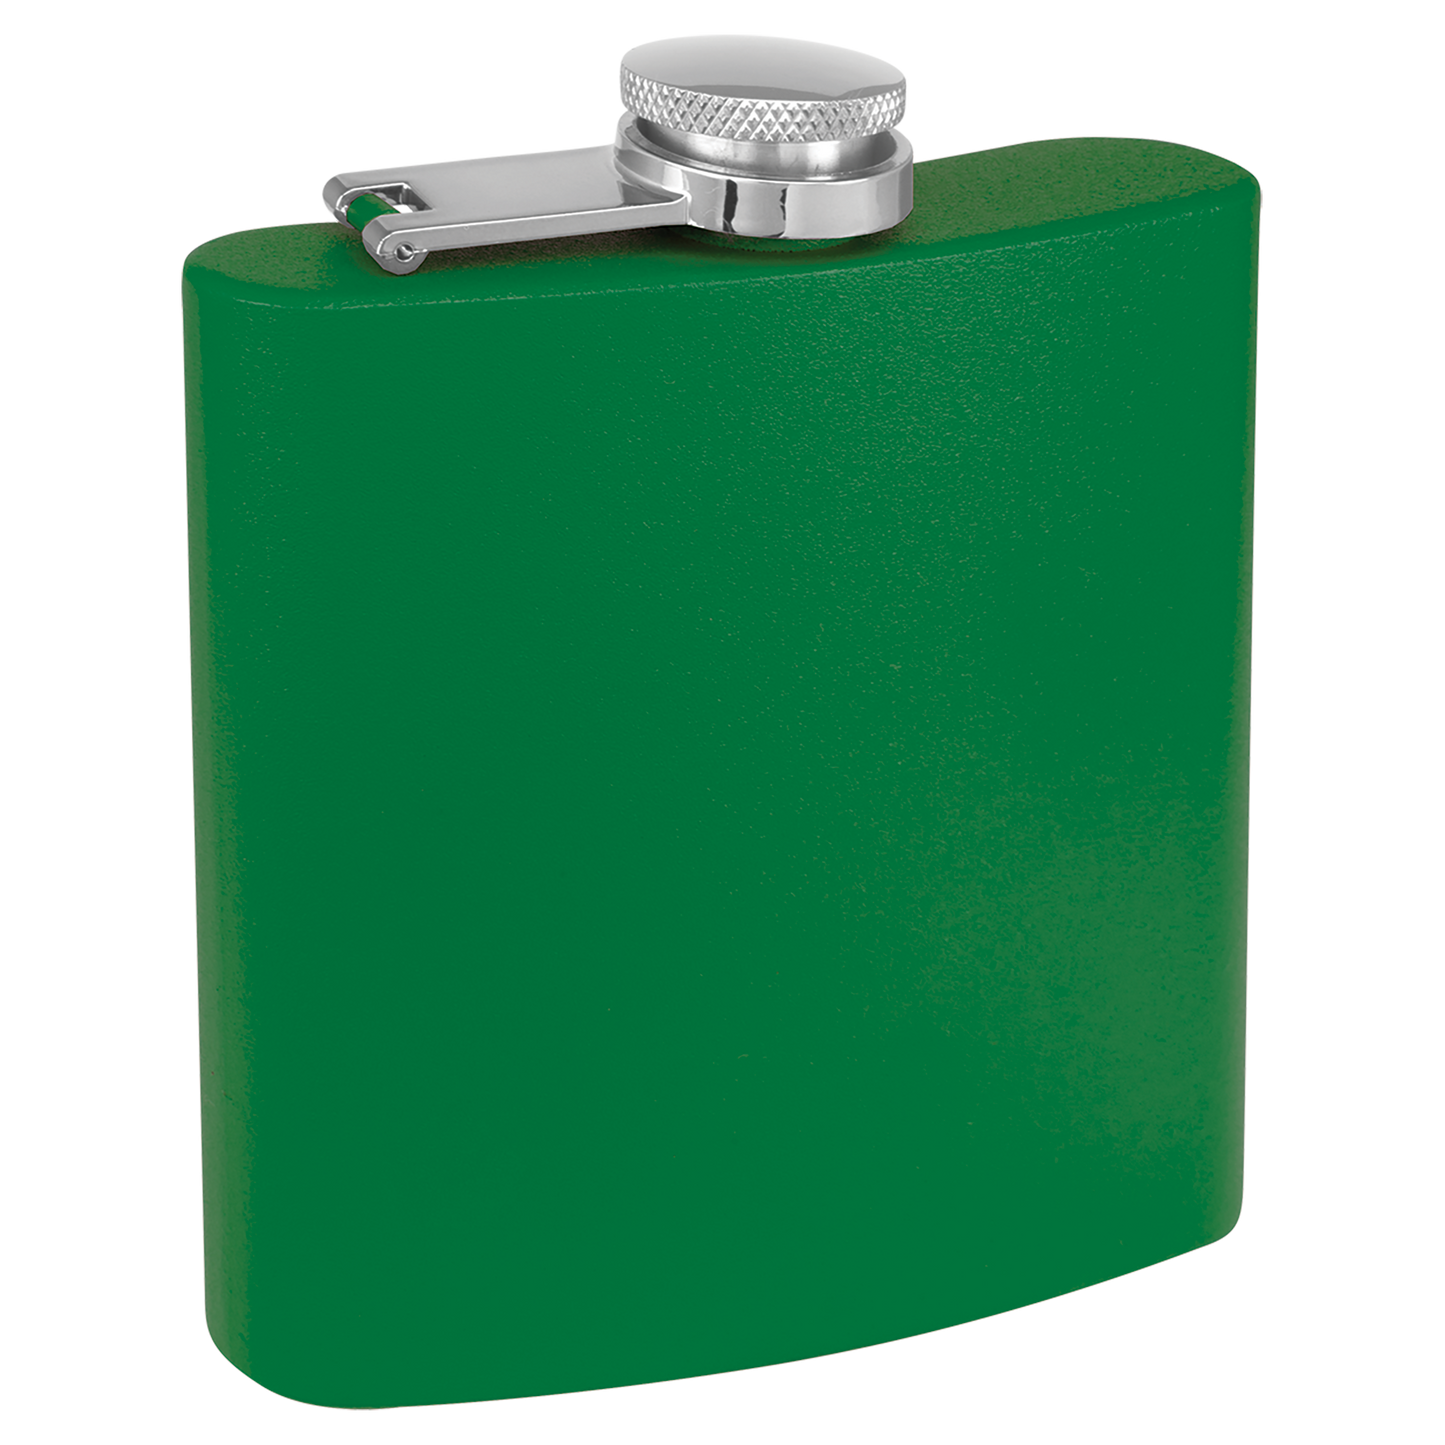 6 oz. Powder Coated Stainless Steel Flask